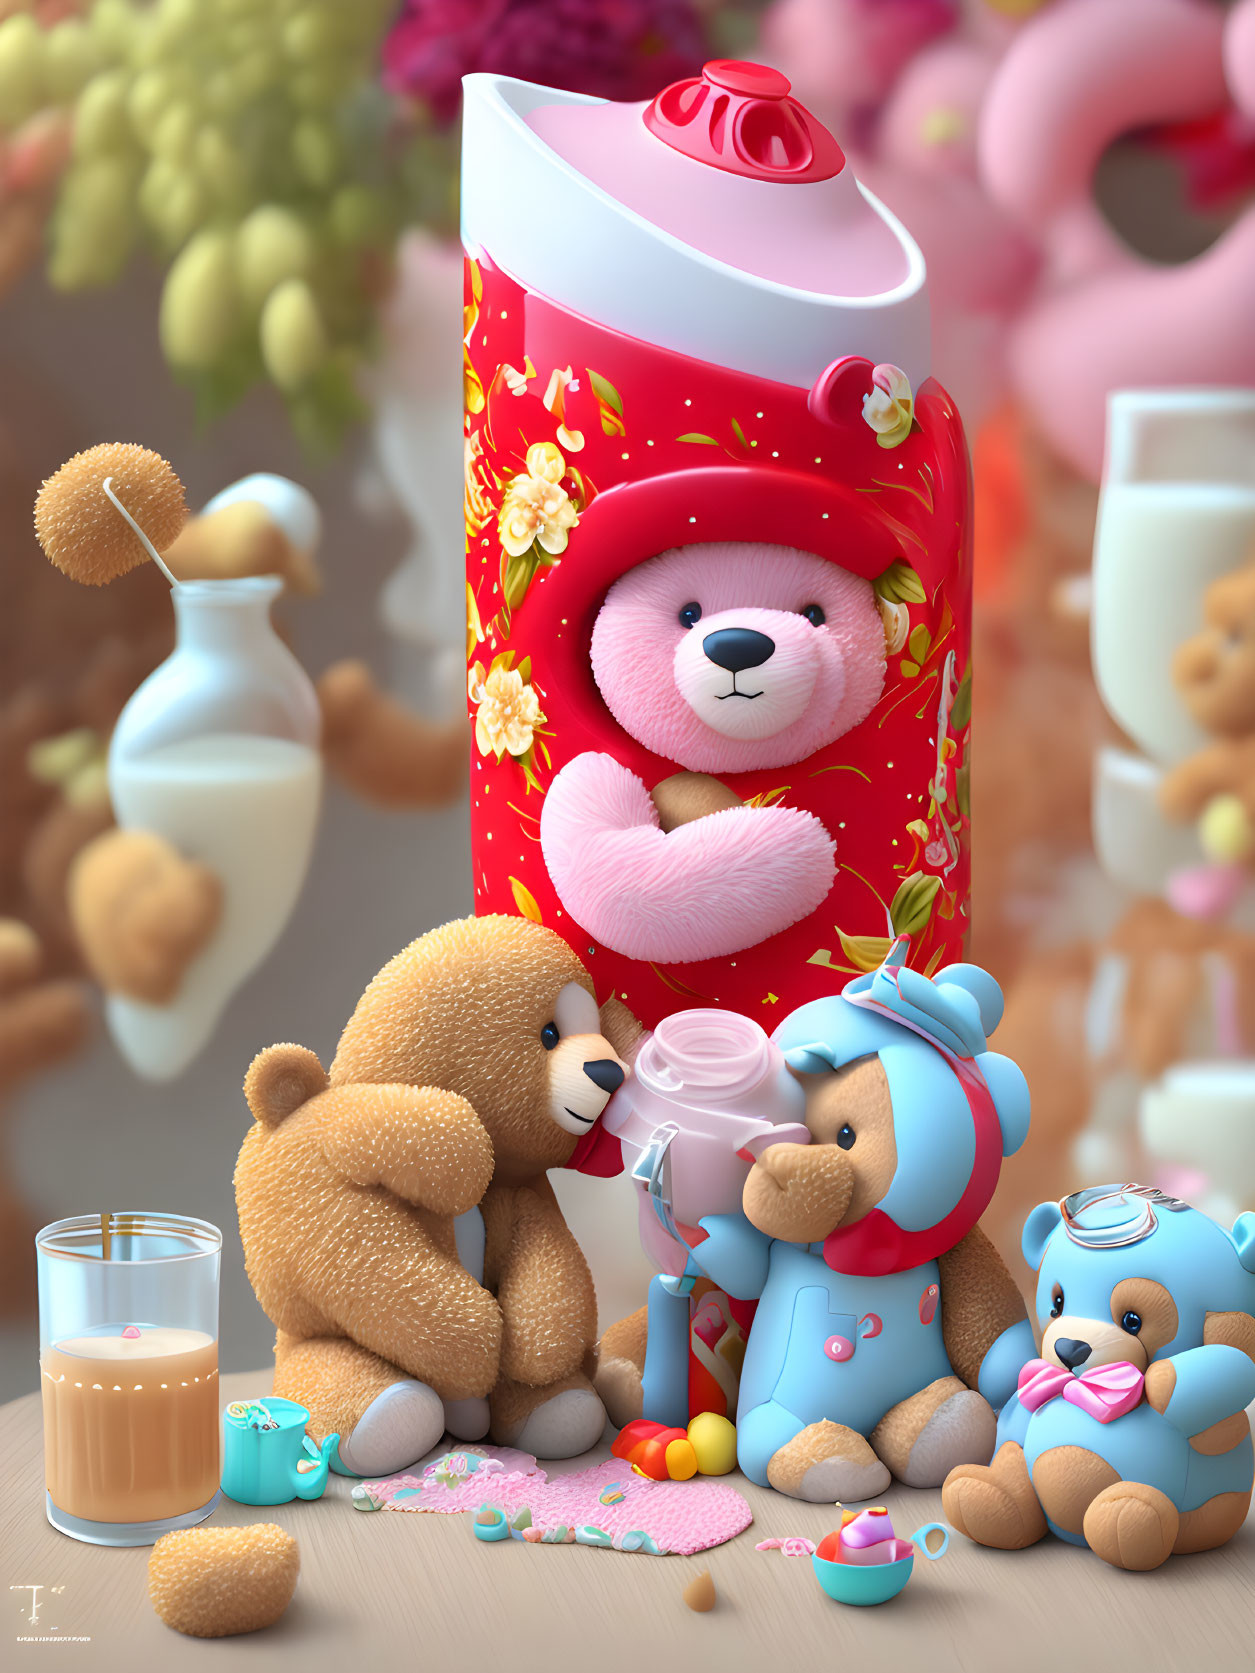 Whimsical Teddy Bear Arrangement with Toys and Milk Bottles